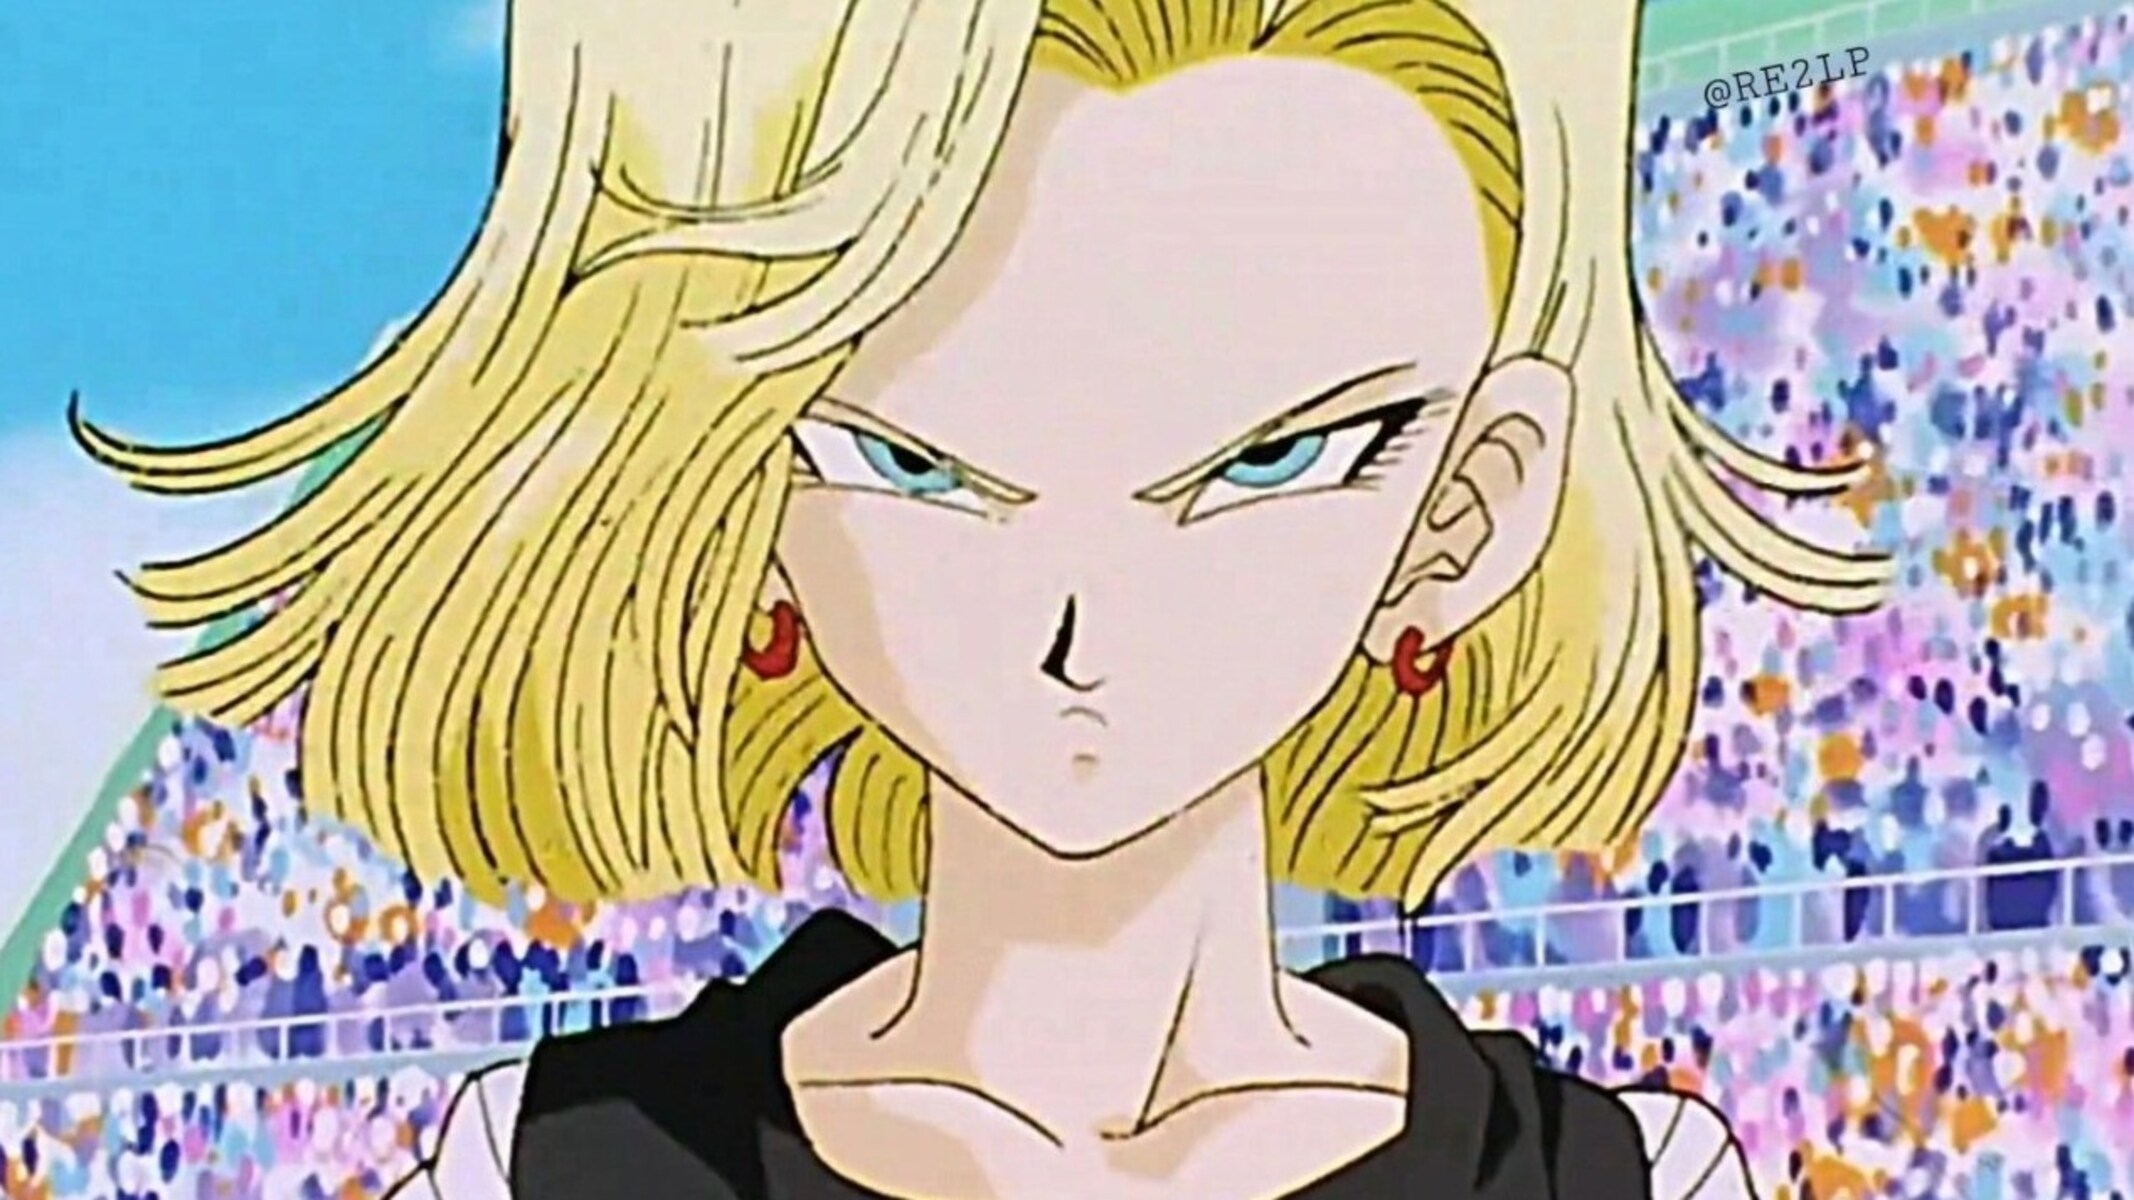 This is a beautiful Android 18 i 1